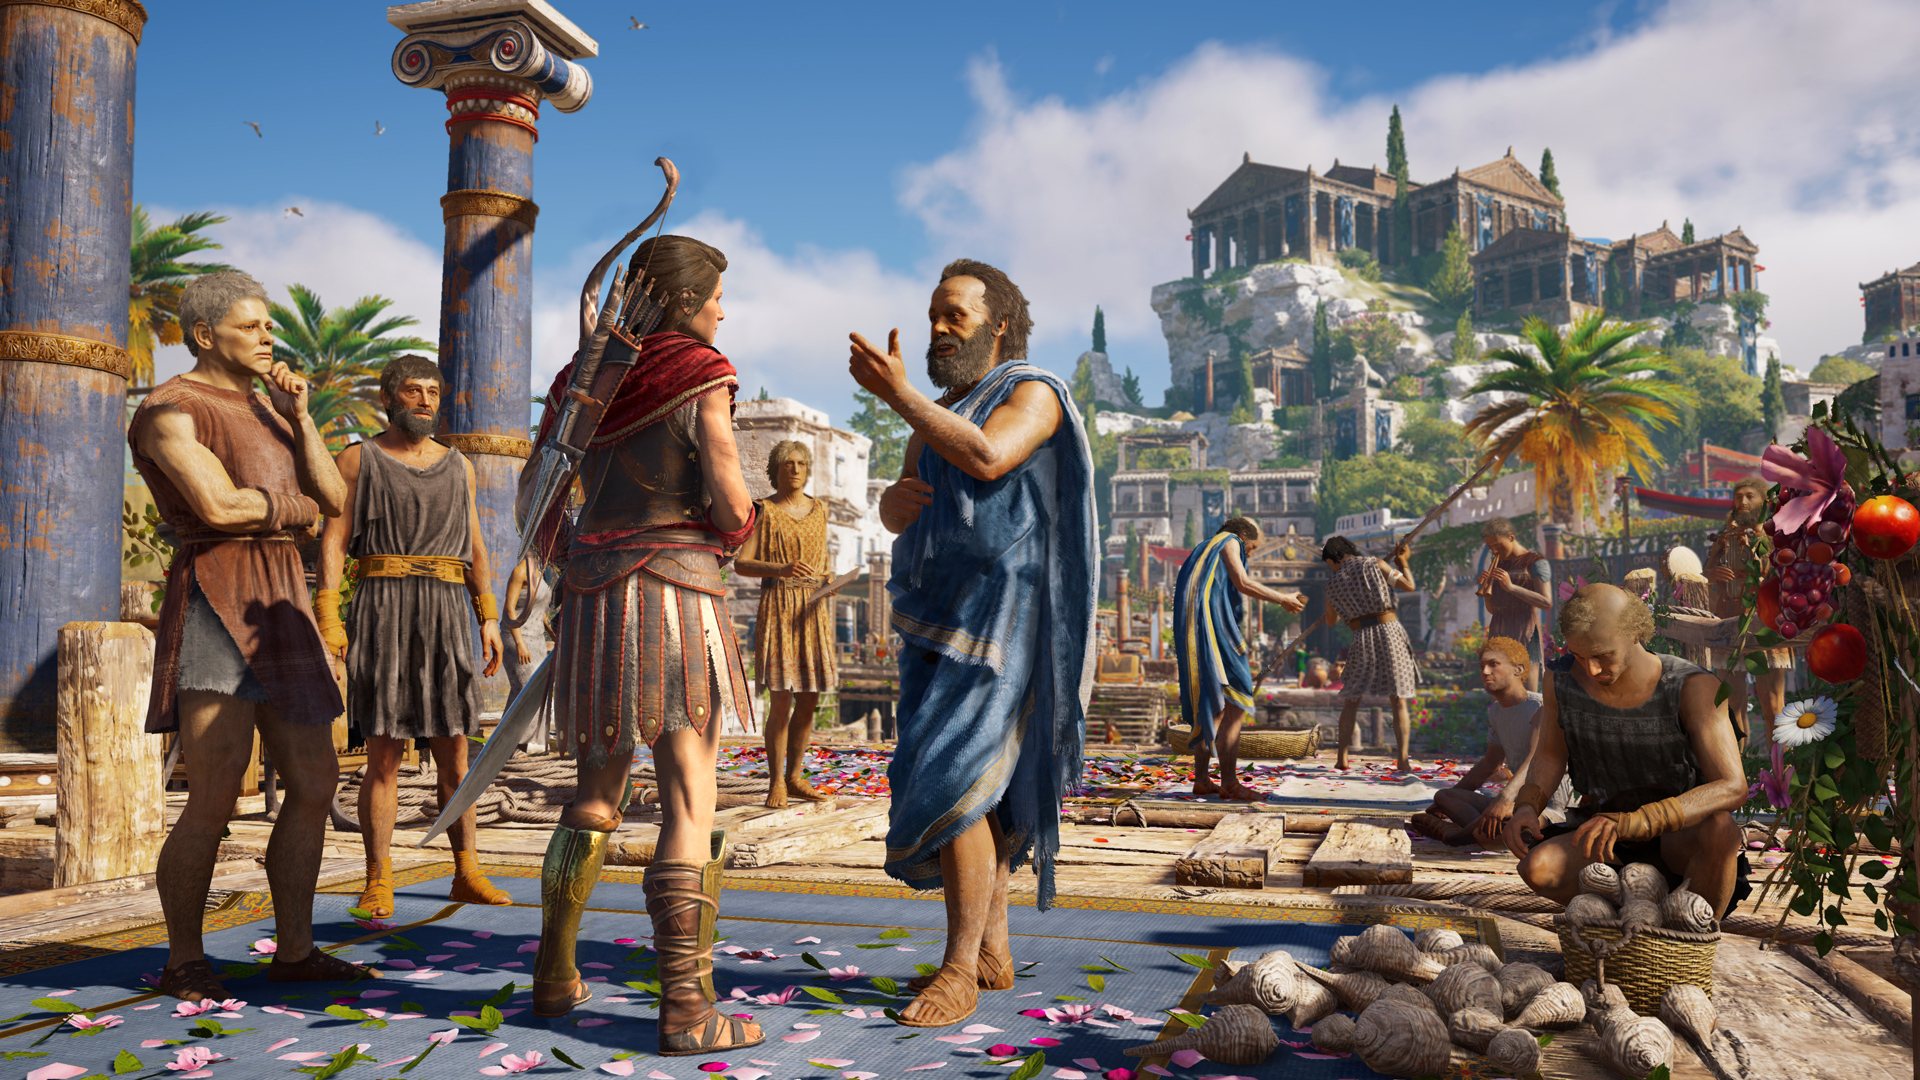 Assassin's Creed Odyssey Deluxe Edition EU Steam Altergift